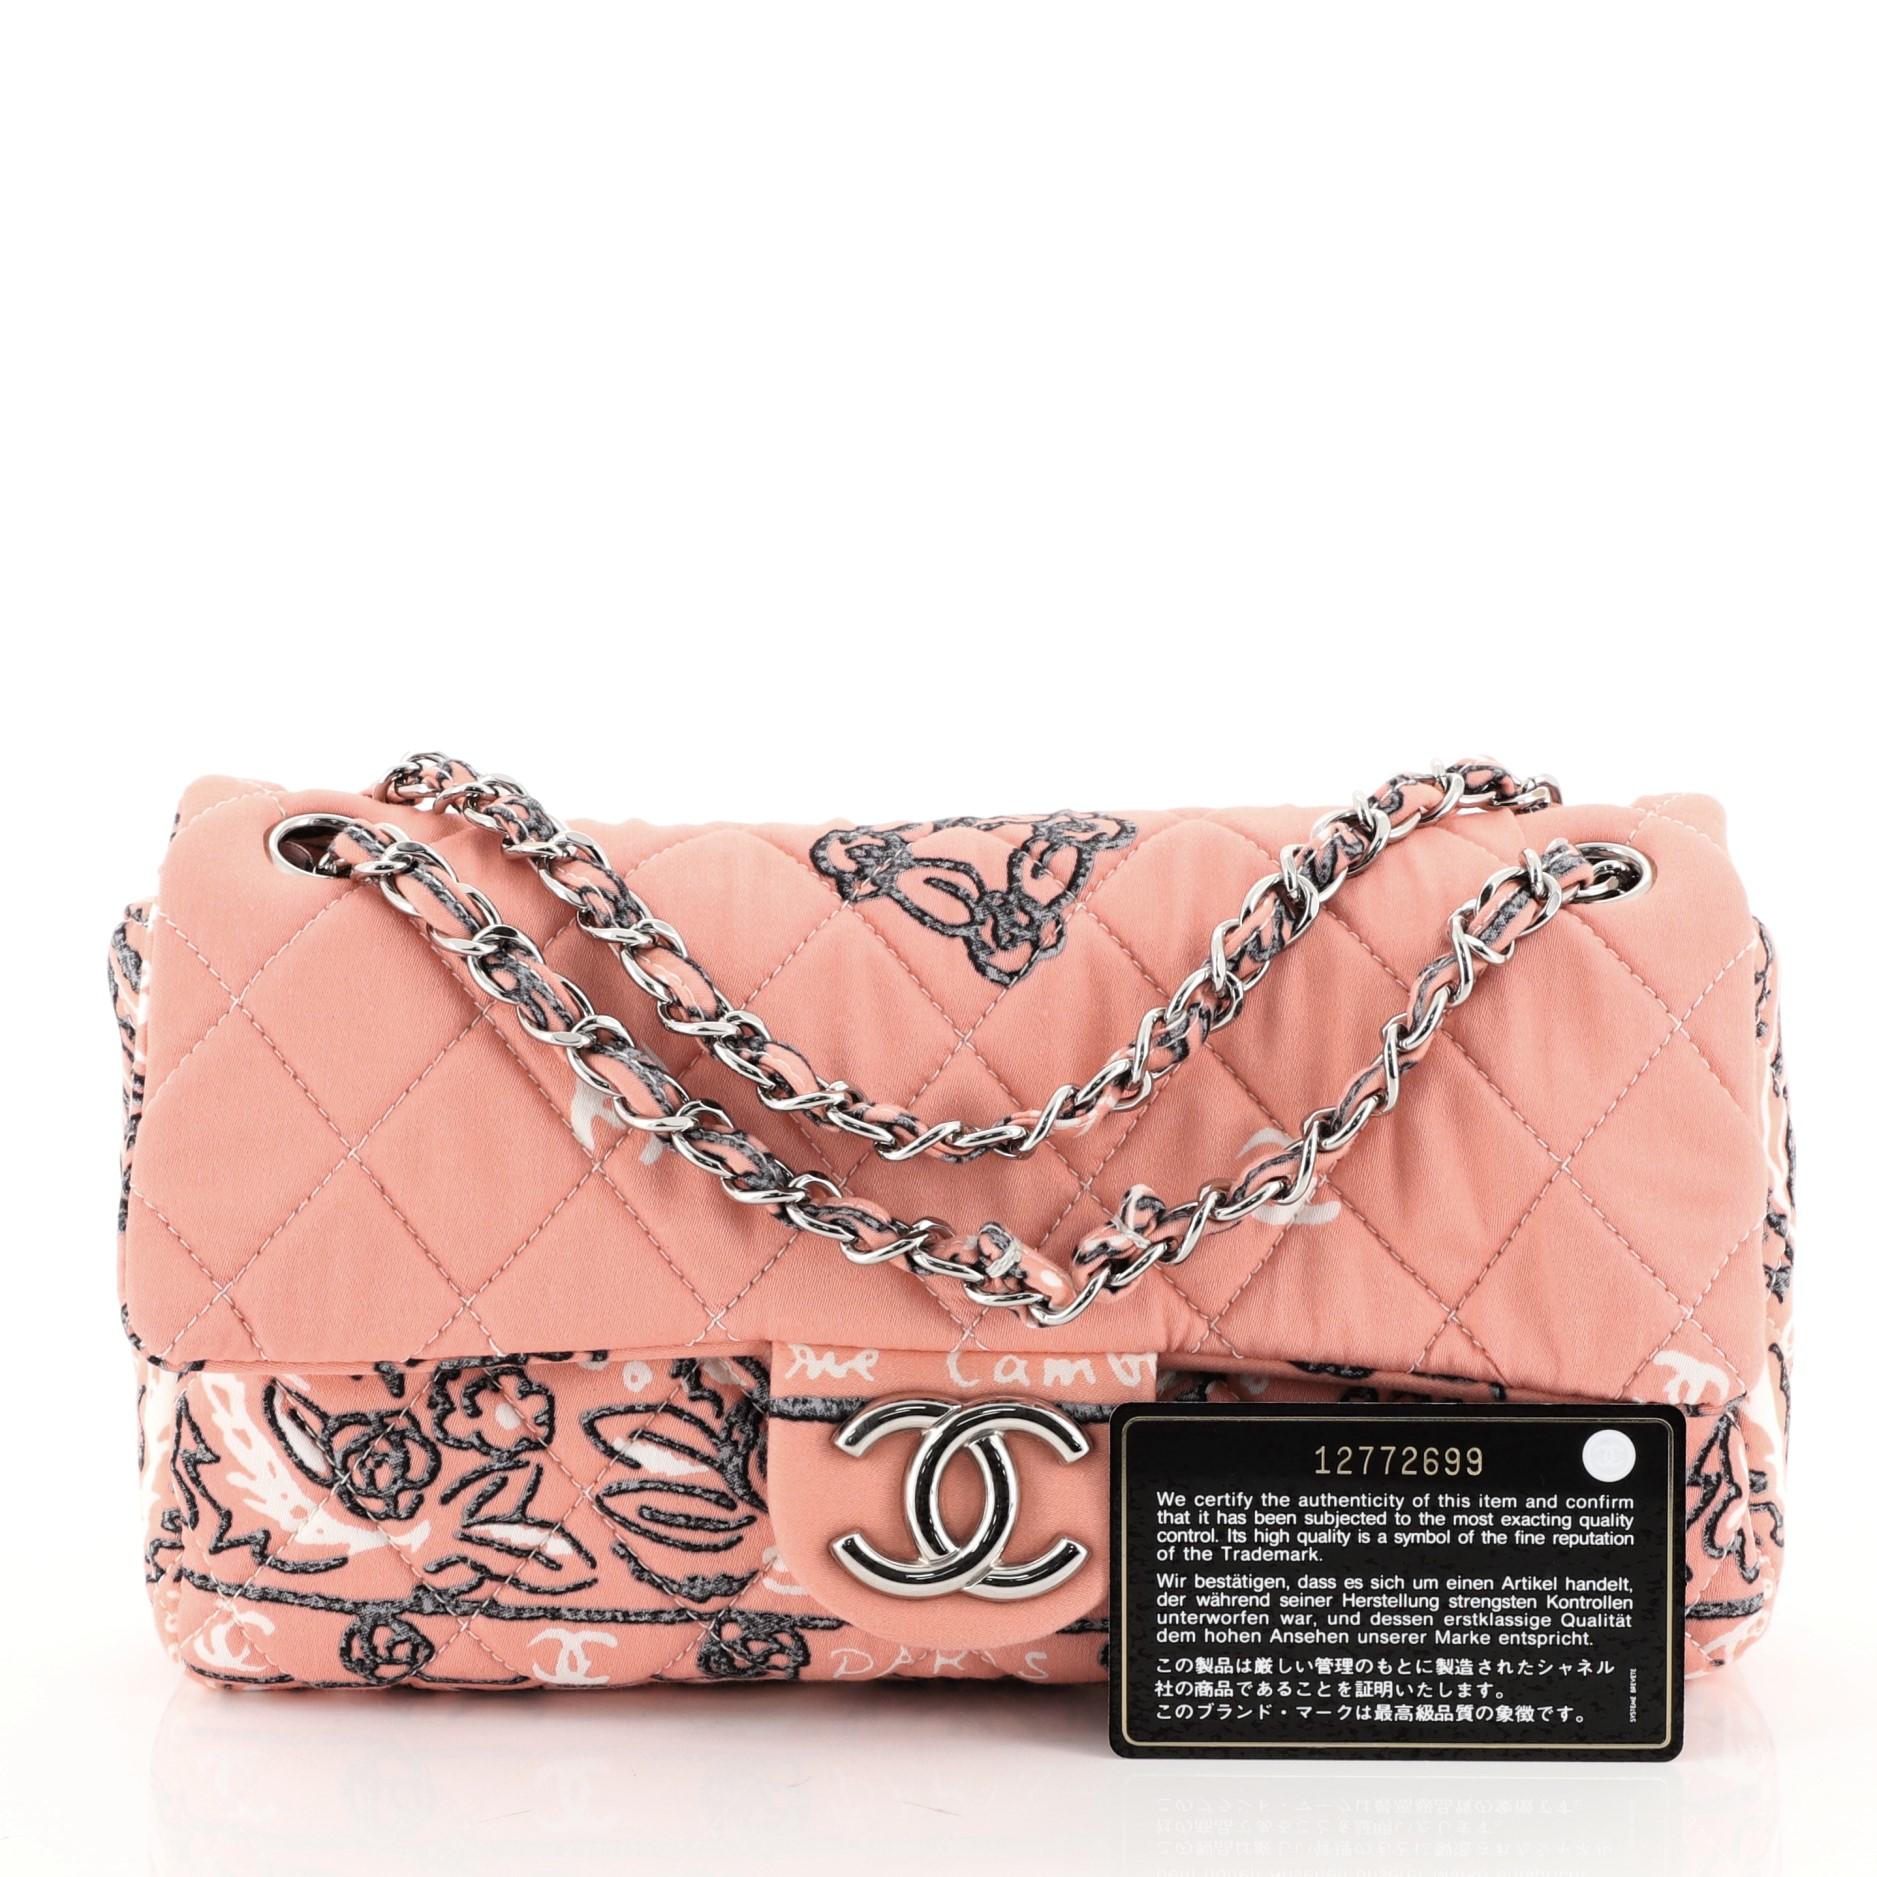 This Chanel Bandana Flap Bag Quilted Canvas Medium, crafted from pink quilted canvas with bandana-inspired print, features woven-in canvas chain strap, CC logo on the flap and silver-tone hardware. It opens to a neutral fabric interior with zip